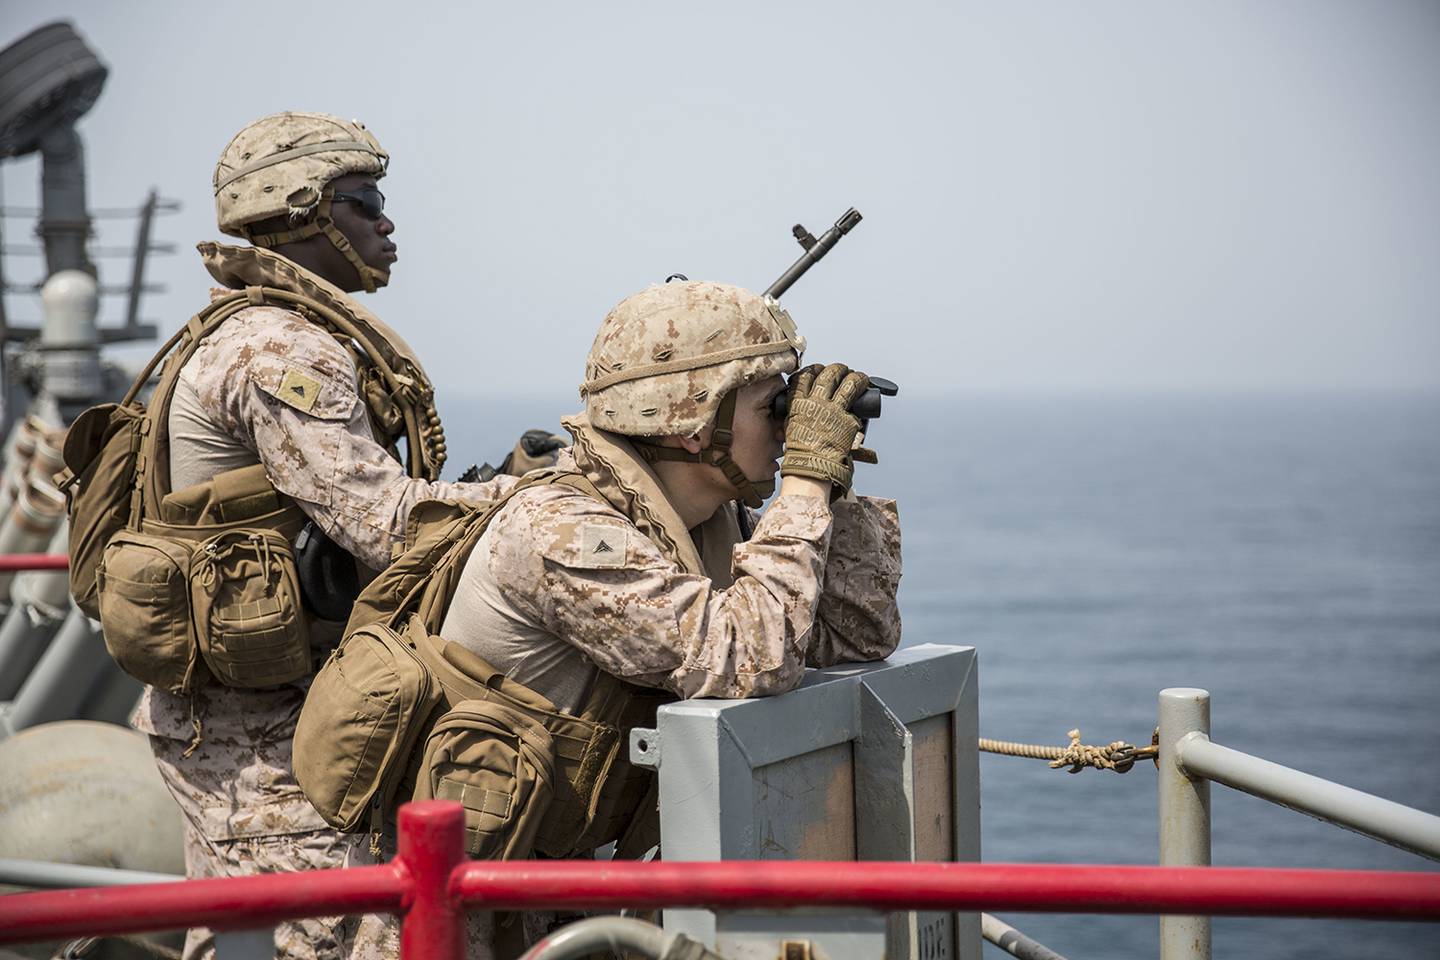 Marines provide security aboard the amphibious dock landing ship USS Harpers Ferry (LSD 49) on July 23, 2019, during a Strait of Hormuz transit.